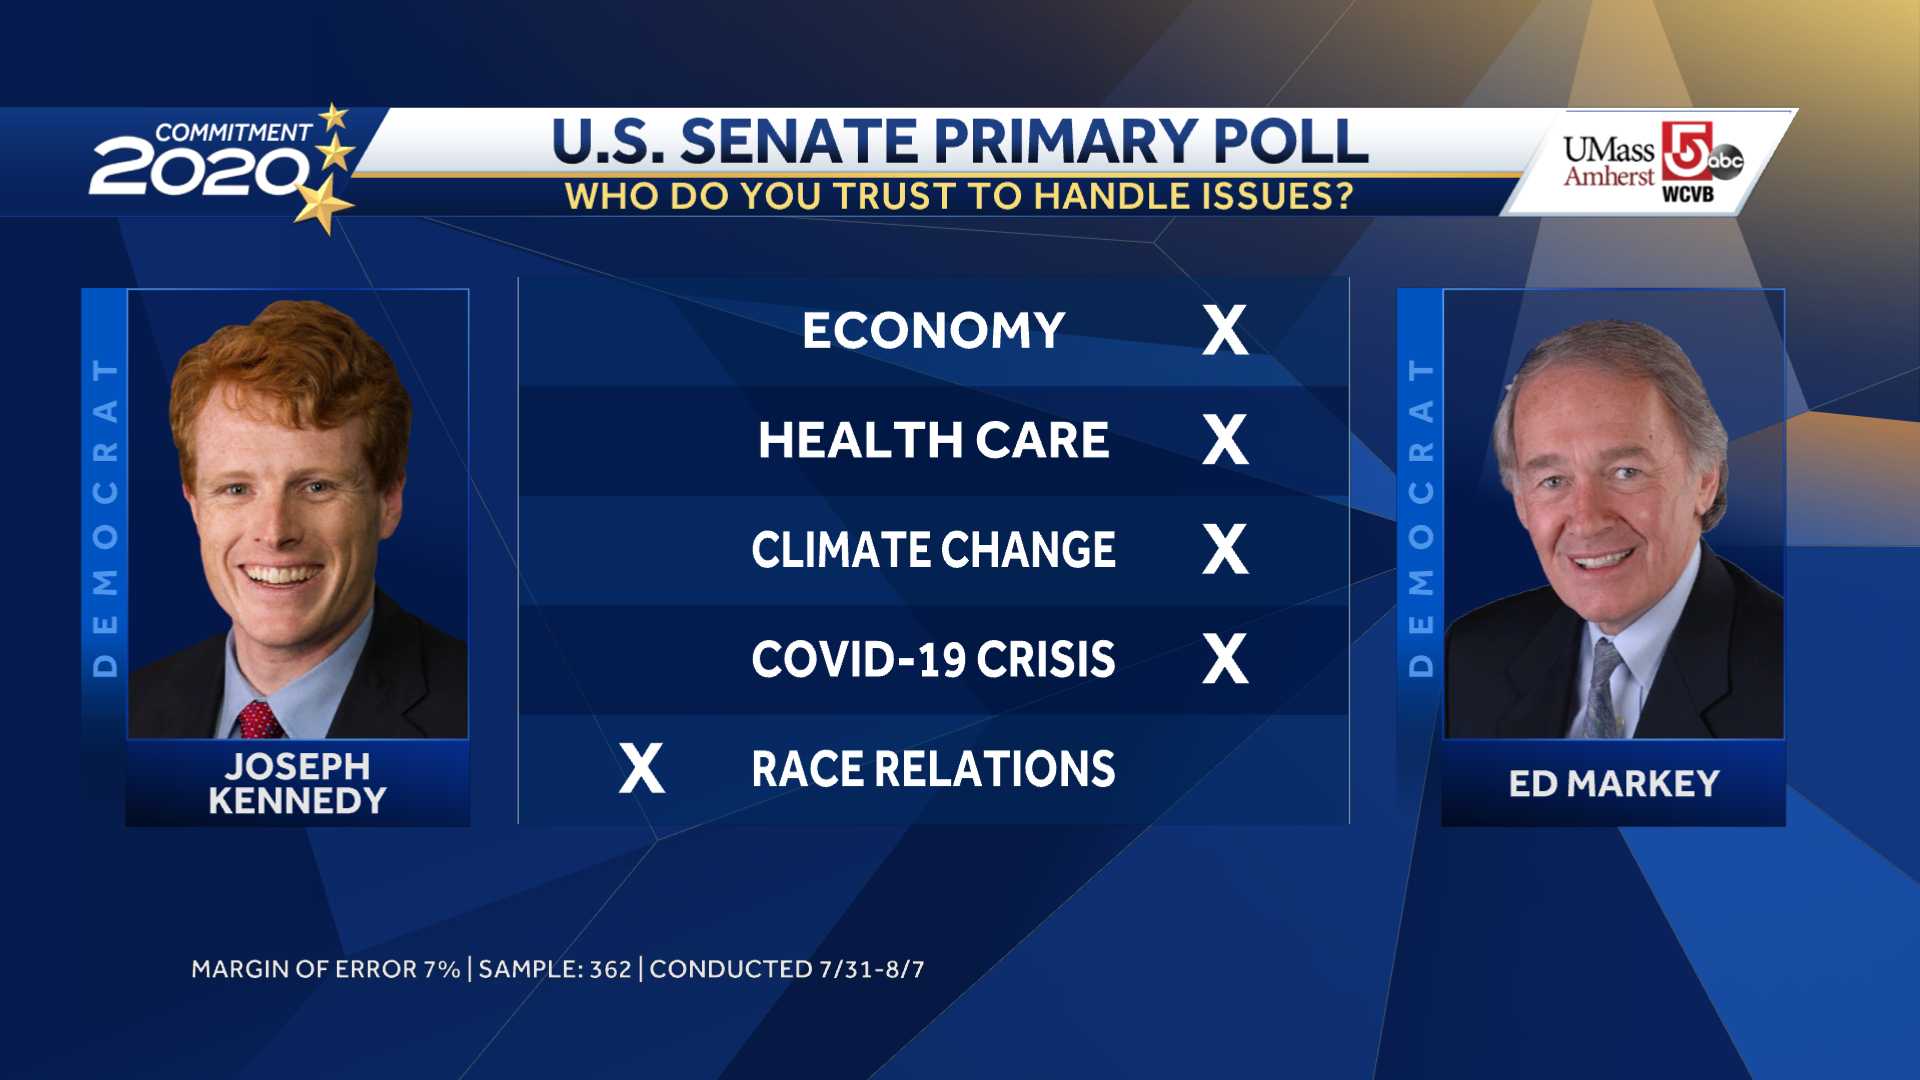 New US Senate Democratic Primary poll shows Markey with strong momentum